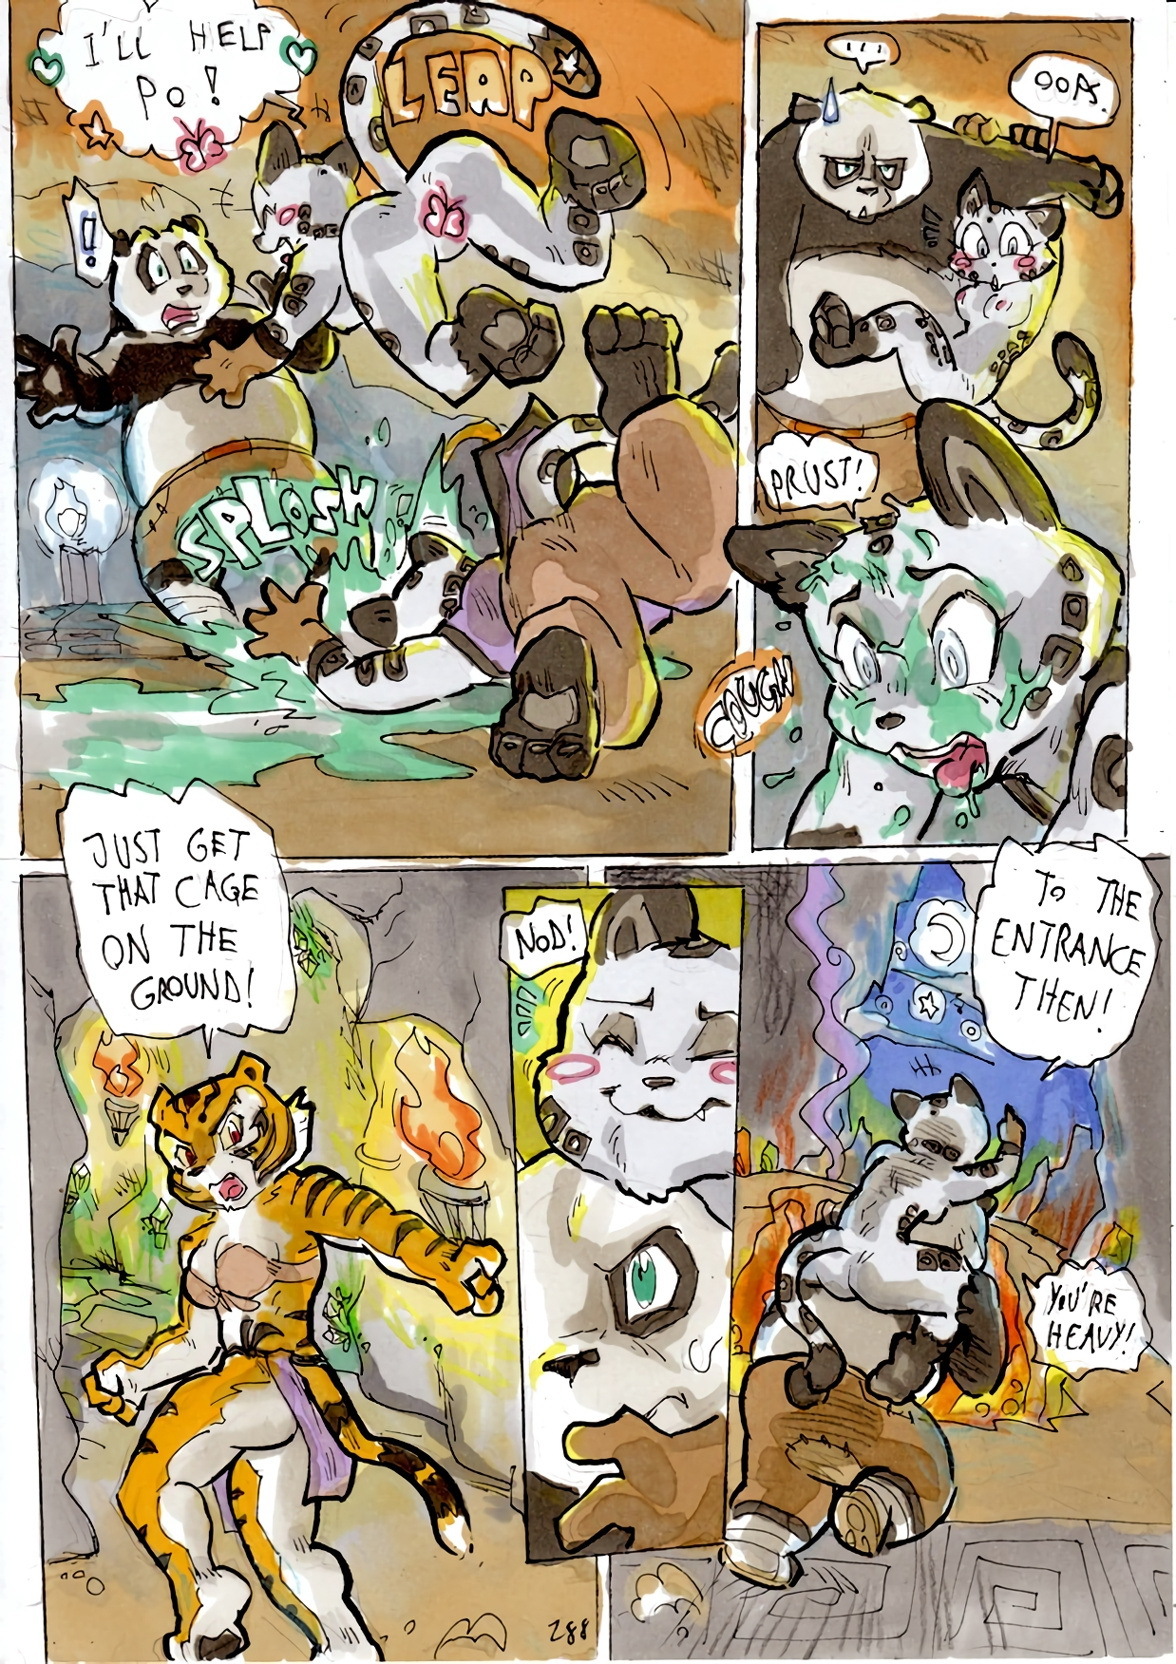 Better Late than Never 2 - Page 143